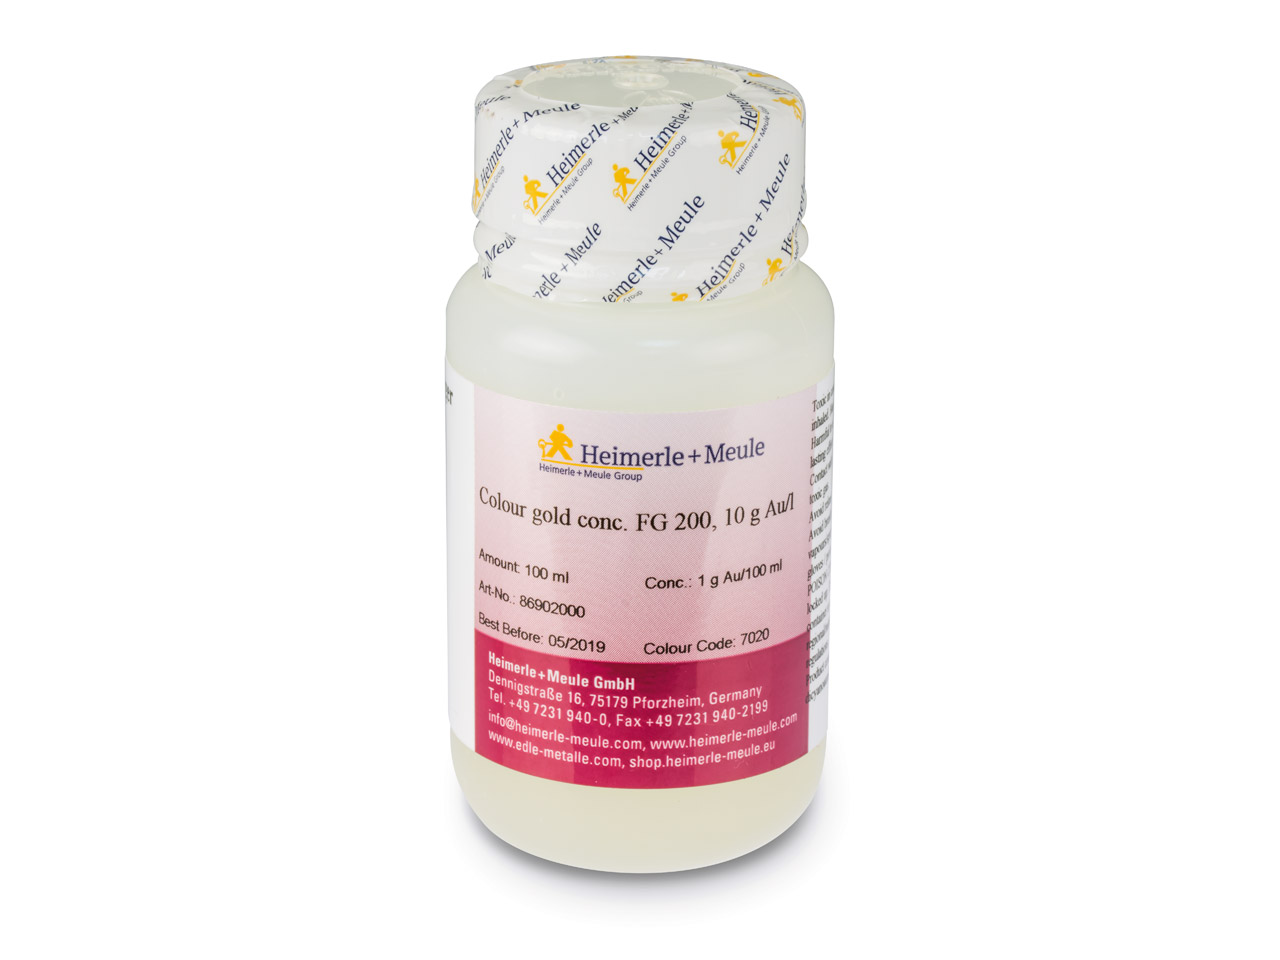 Do you have a safety data sheet for Heimerle + Meule Gold Plating Solution Concentrate 100ml 1g Au/100ml 18ct Fg7020, Un1935?